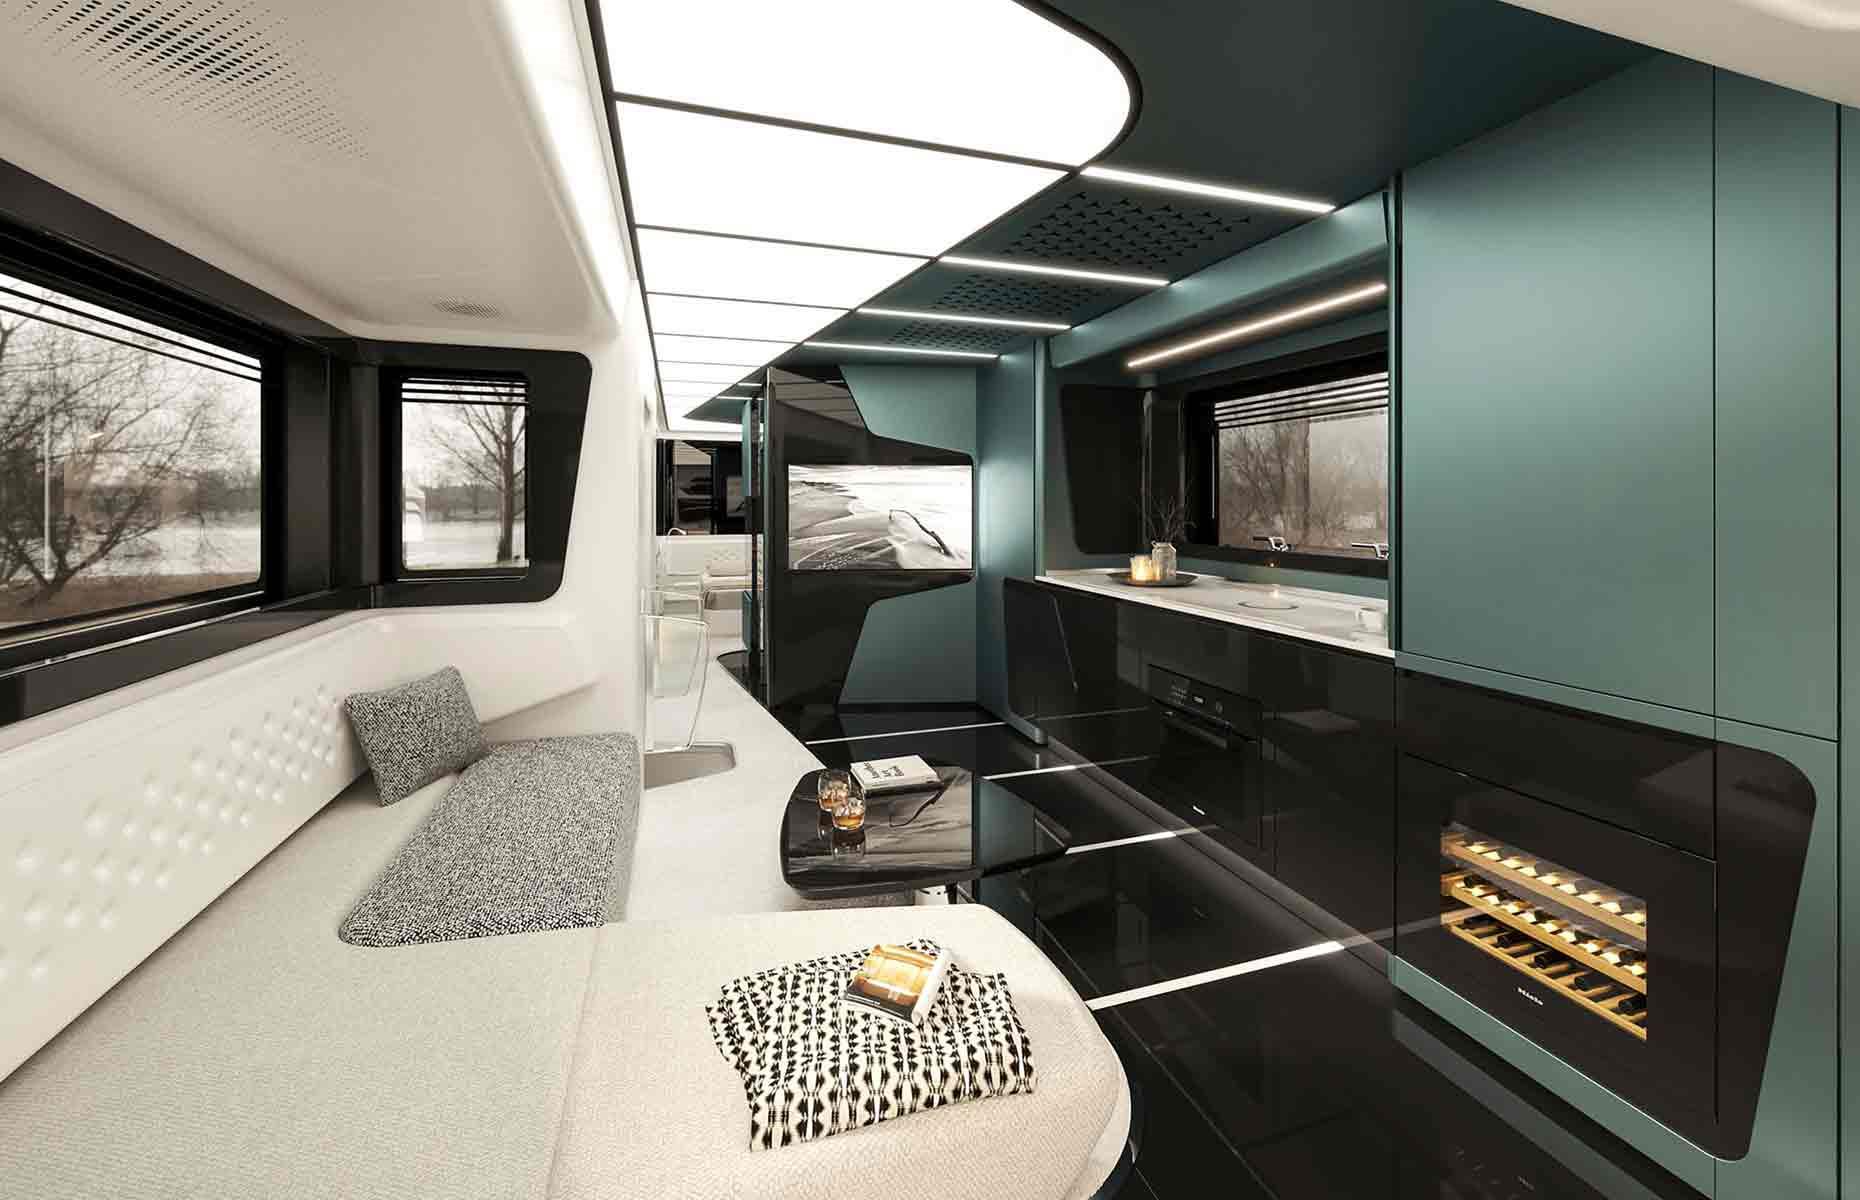 <p>Sleek, indulgent design defines the RV's contemporary interior. Fold-out illuminated stairs lead up into the extraordinary living space. Luxury touches even extend to the cab at the front, where the four car seats feature individual air-conditioning systems and a massage function. </p>  <p>With illuminated panels inset into the ceiling, the main hub of the motorhome is streamlined and evocative of a spaceship. The high-end kitchen includes an induction cooktop, an oven, a concealed sink, a dishwasher drawer and a fridge freezer. </p>